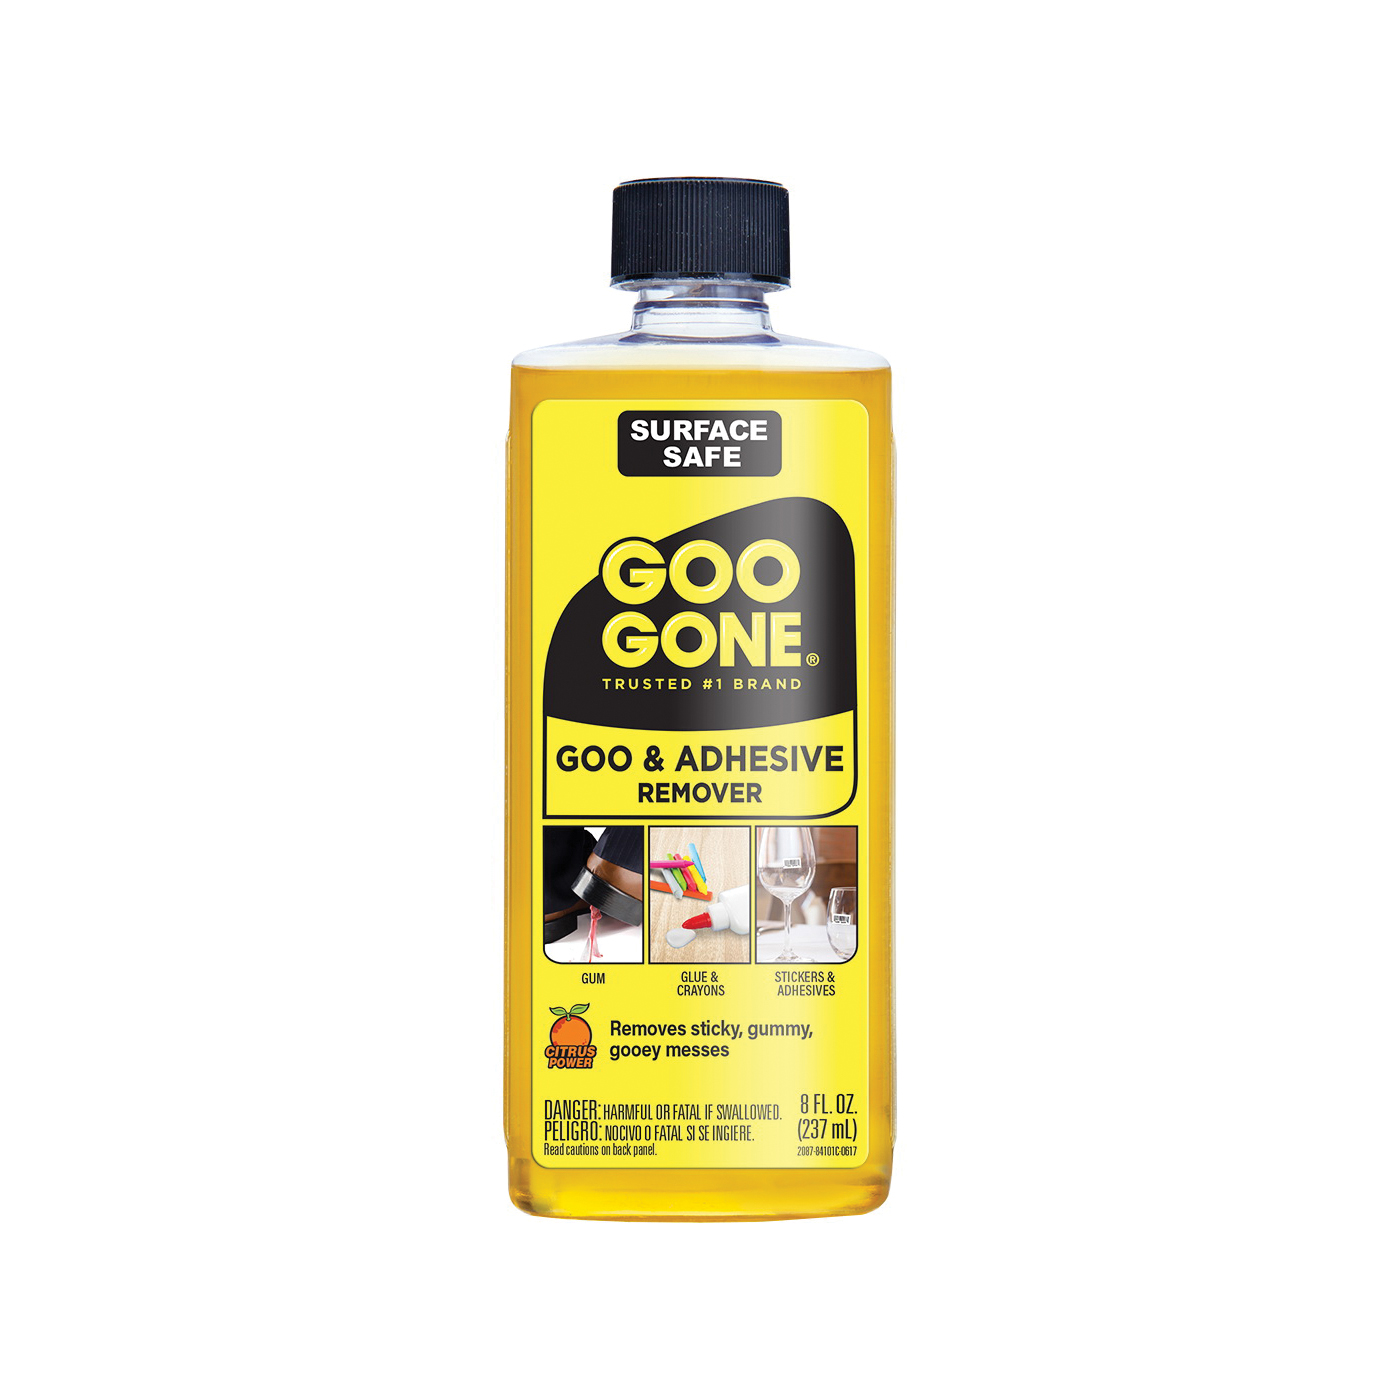 Goo Gone Stain Remover Household Cleaning Products for sale